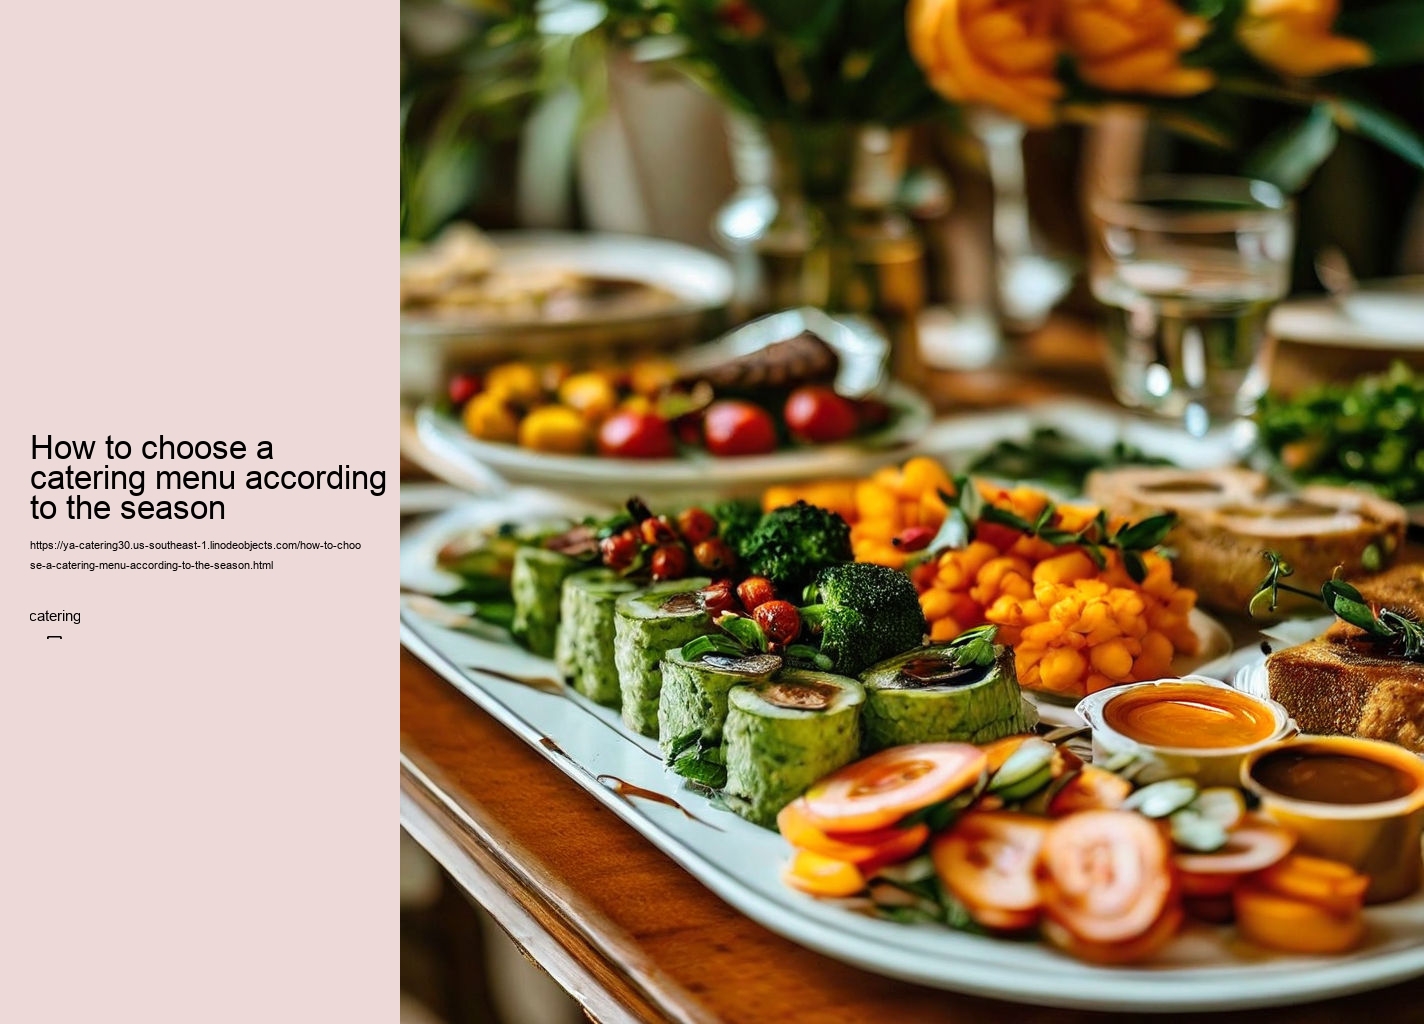 How to choose a catering menu according to the season